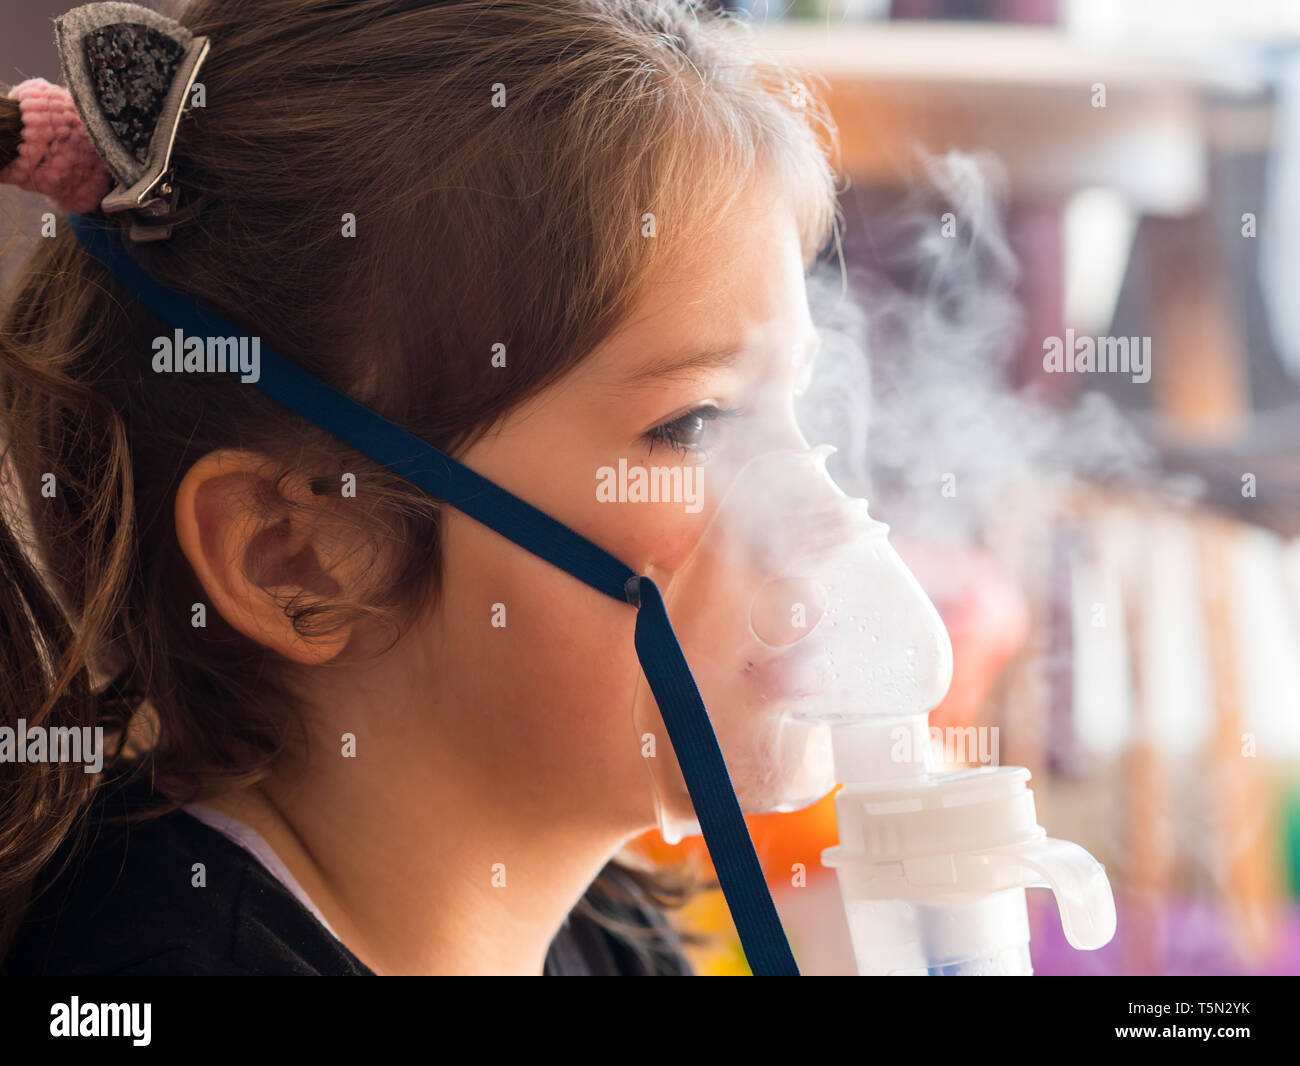 Cute caucasian girl with oxygen mask making inhalation Stock Photo